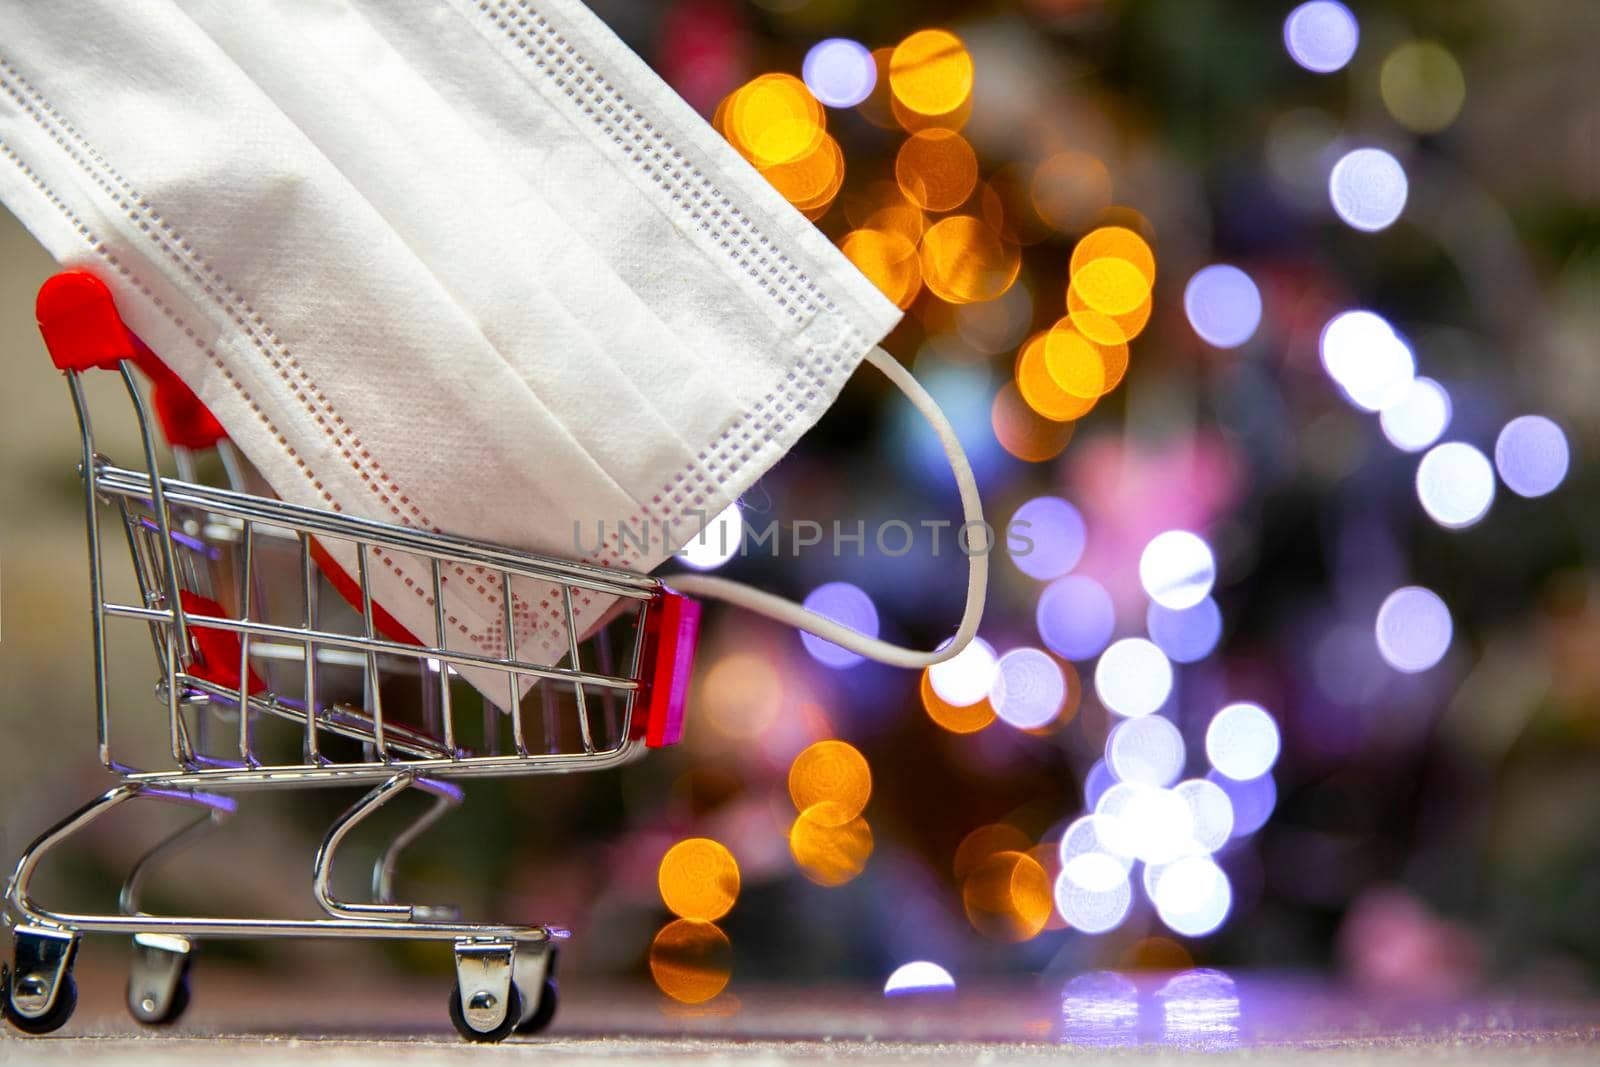 Protective safety mask in iron shopping basket near Christmas tree, Covid-19, coronavirus, holiday concept with copy space and bokeh lights background space for text